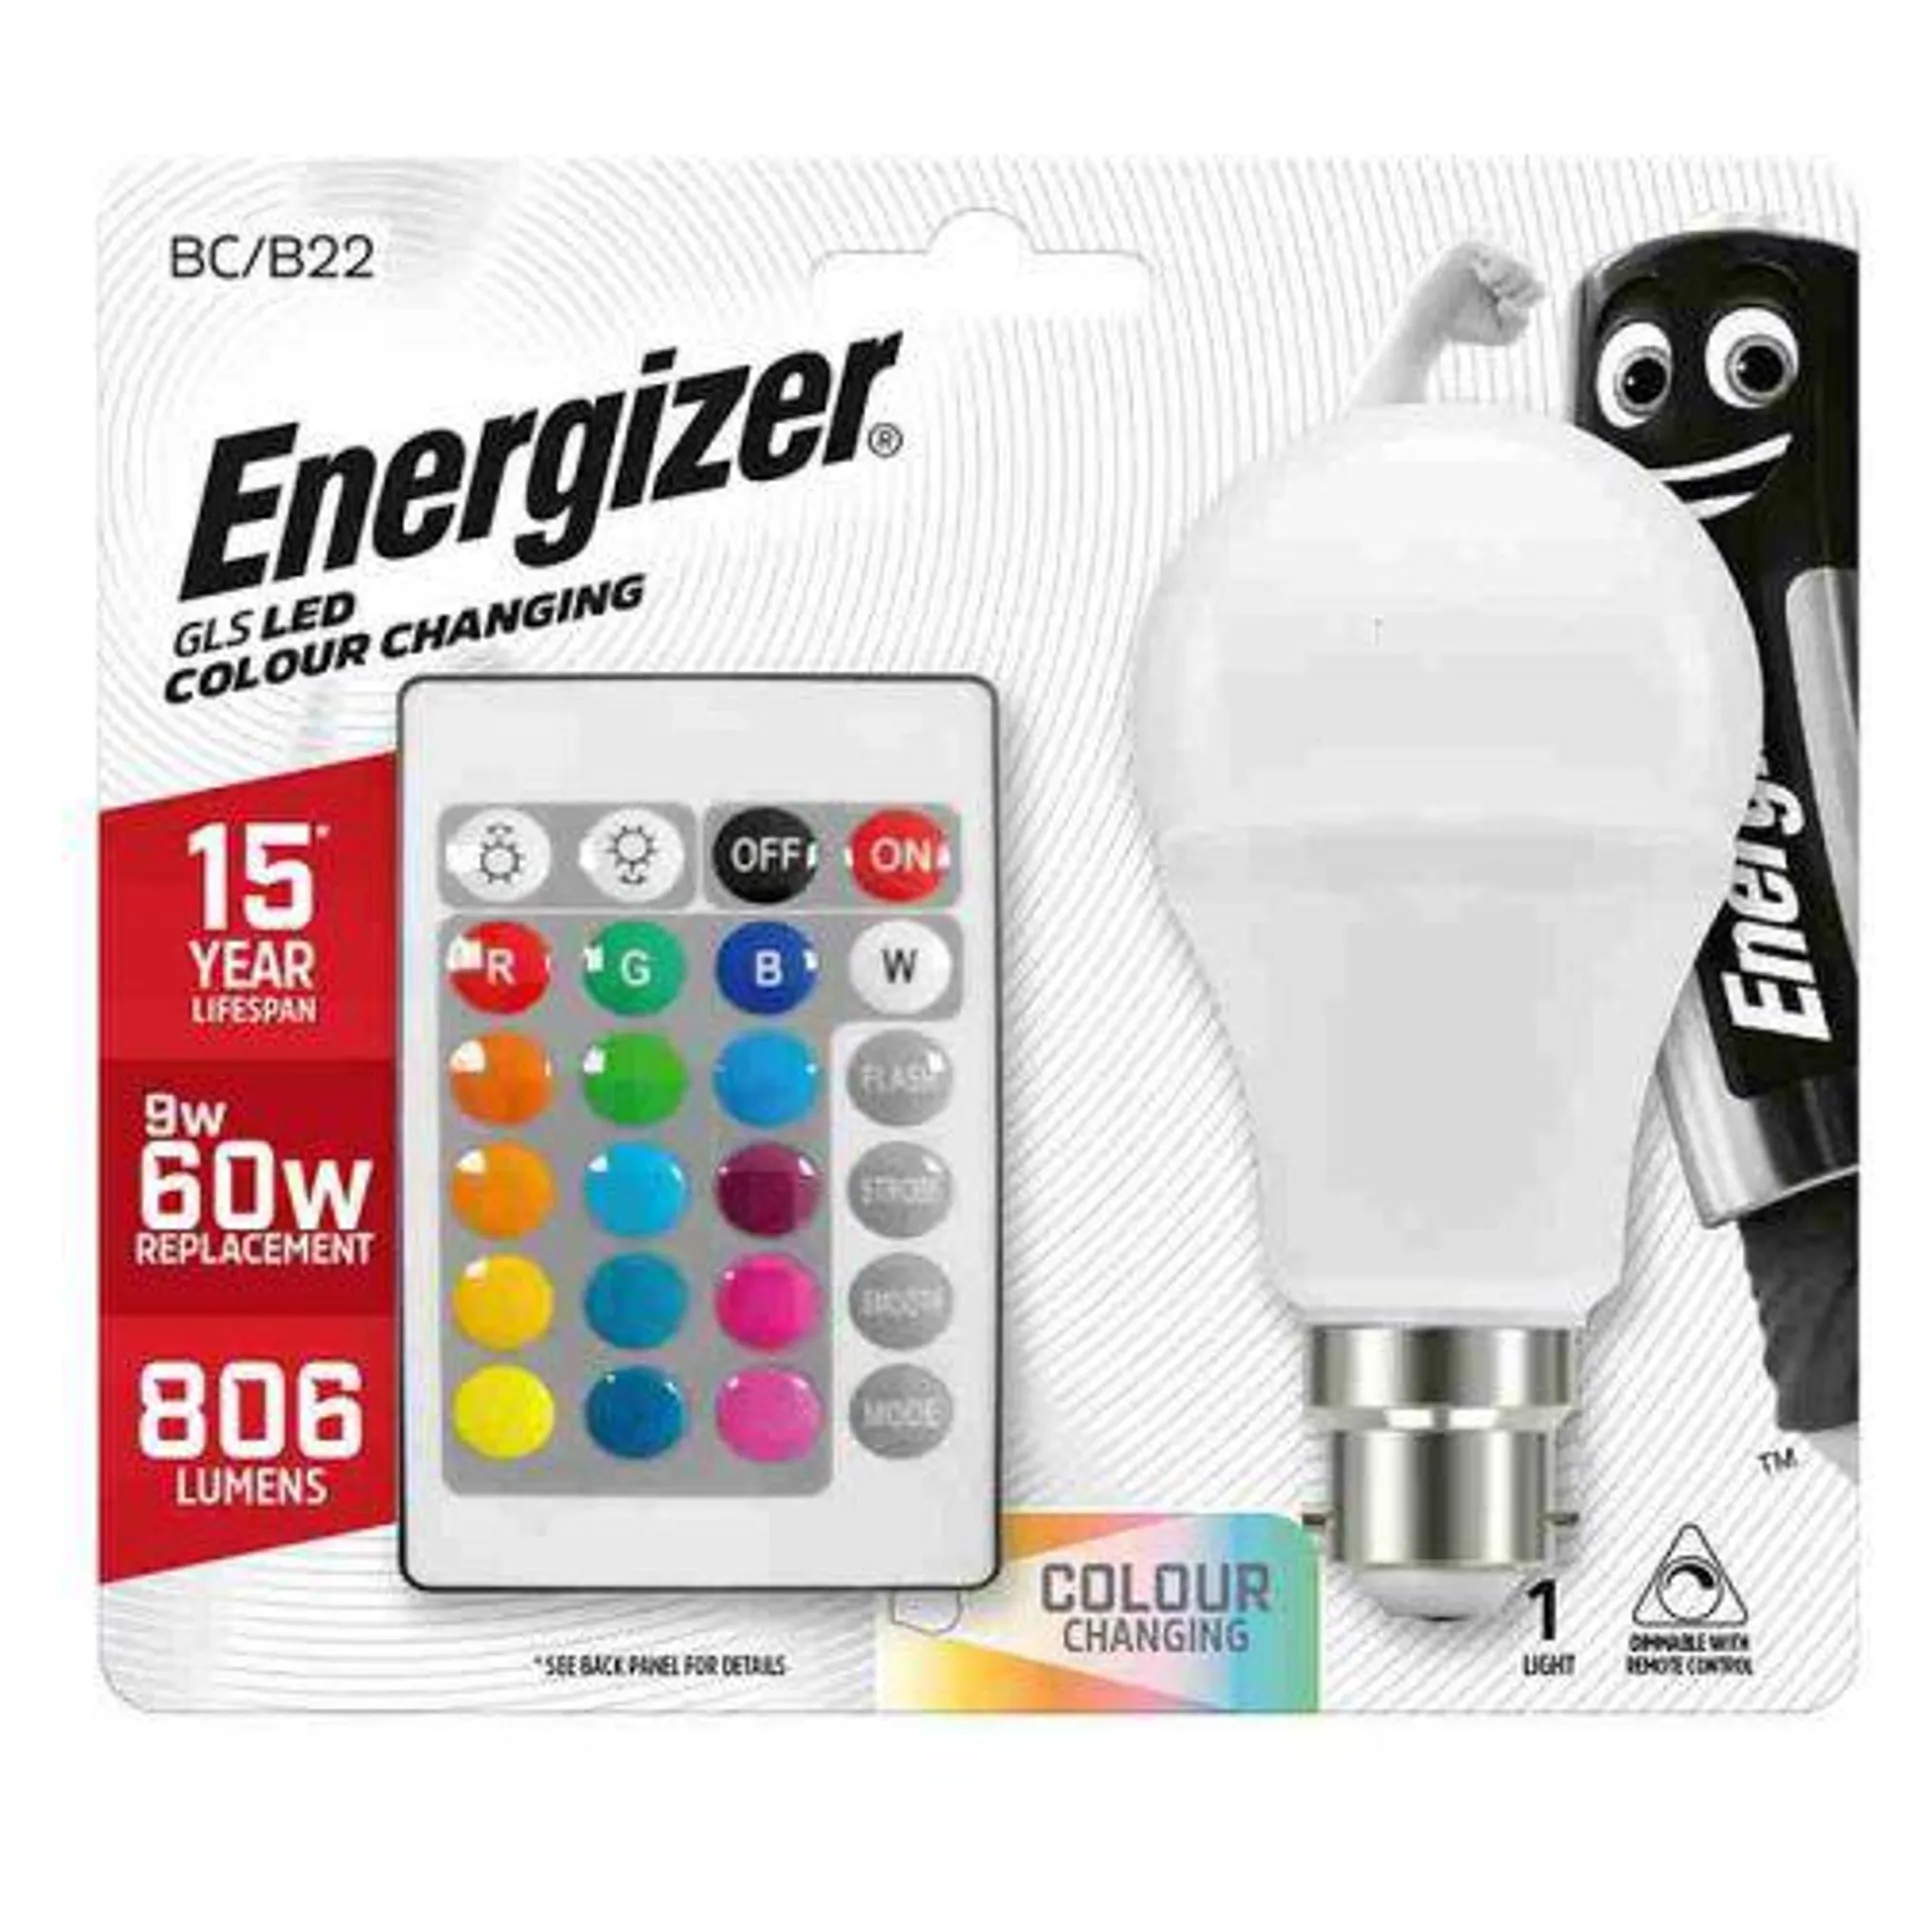 Energizer 9W LED B22 Remote Controlled Colour Changing Bulb